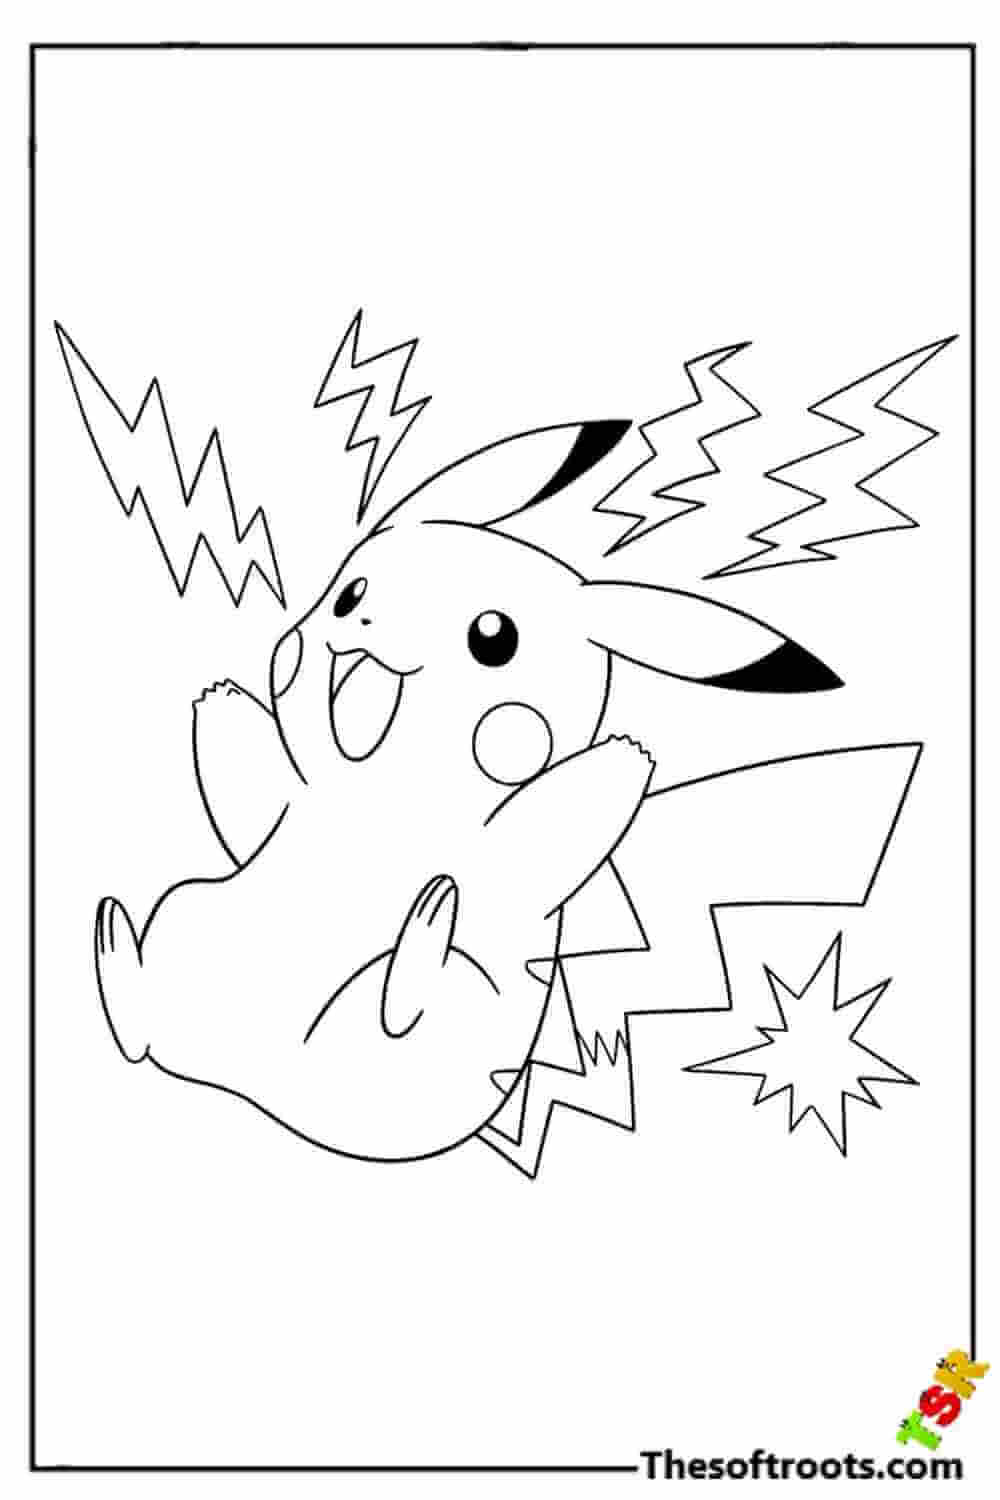 Flying Pikachu coloring pages